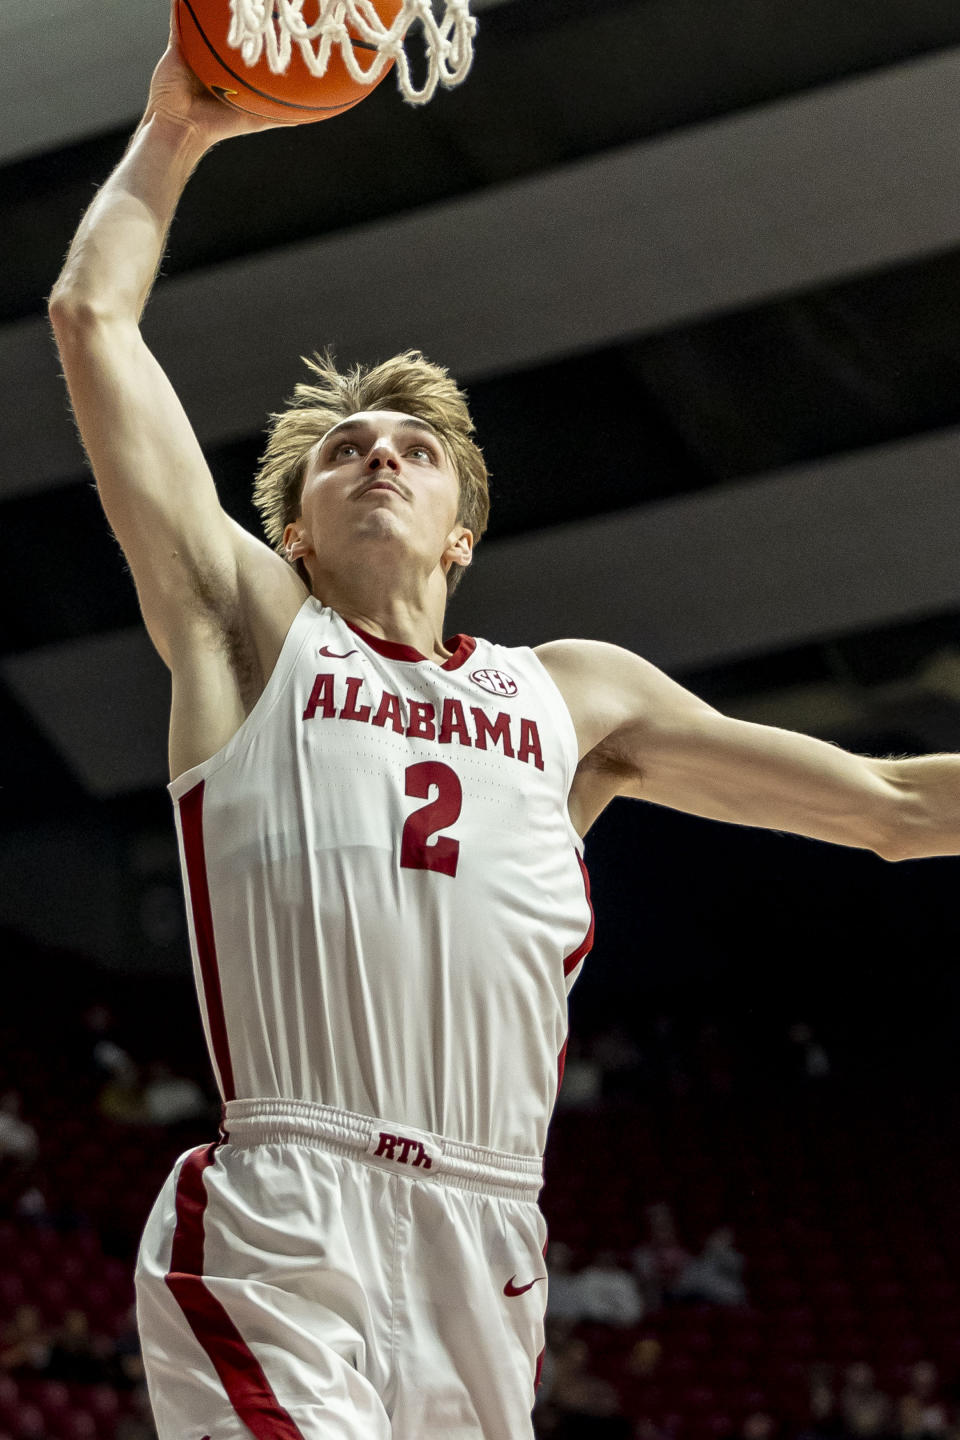 Alabama forward Grant Nelson (2) dunks during the first half of an NCAA college basketball game against Morehead State, Monday, Nov. 6, 2023, in Tuscaloosa, Ala. (AP Photo/Vasha Hunt)